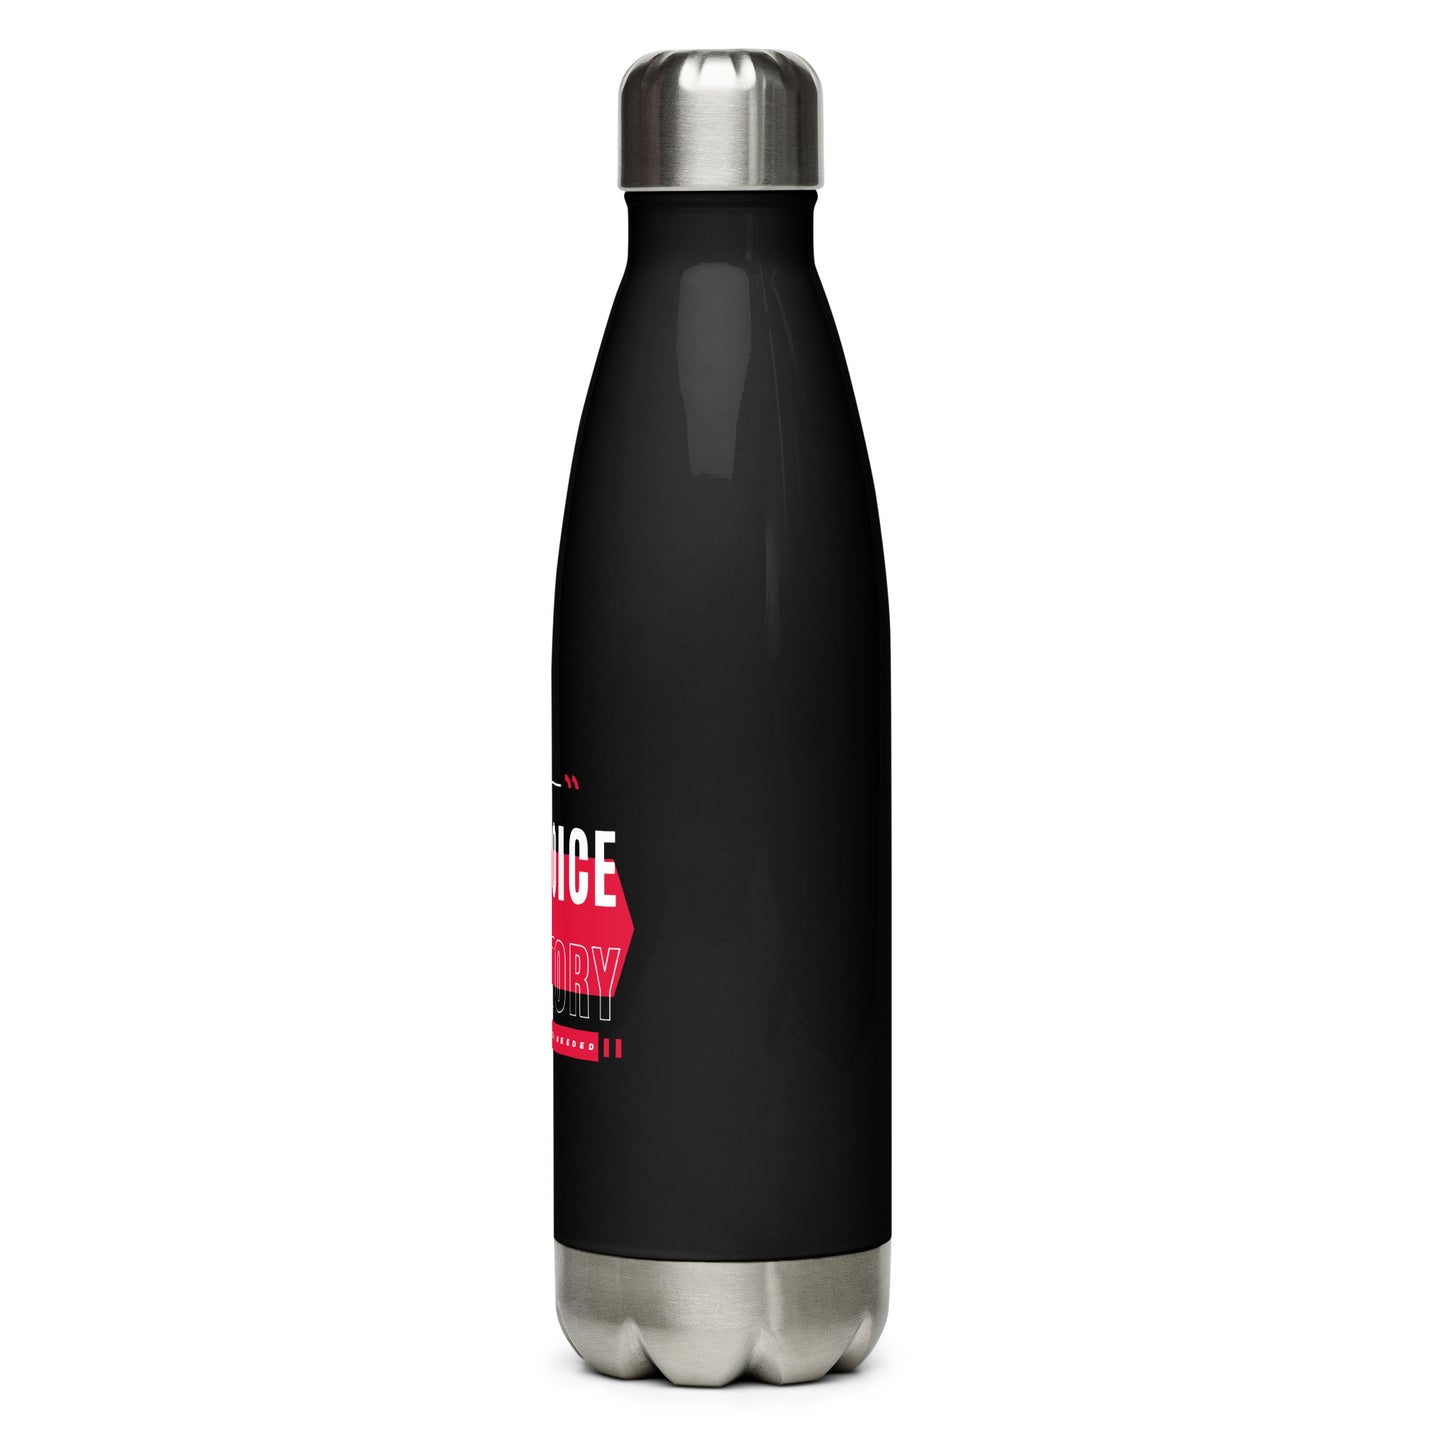 My Voice. My Power Stainless steel water bottle